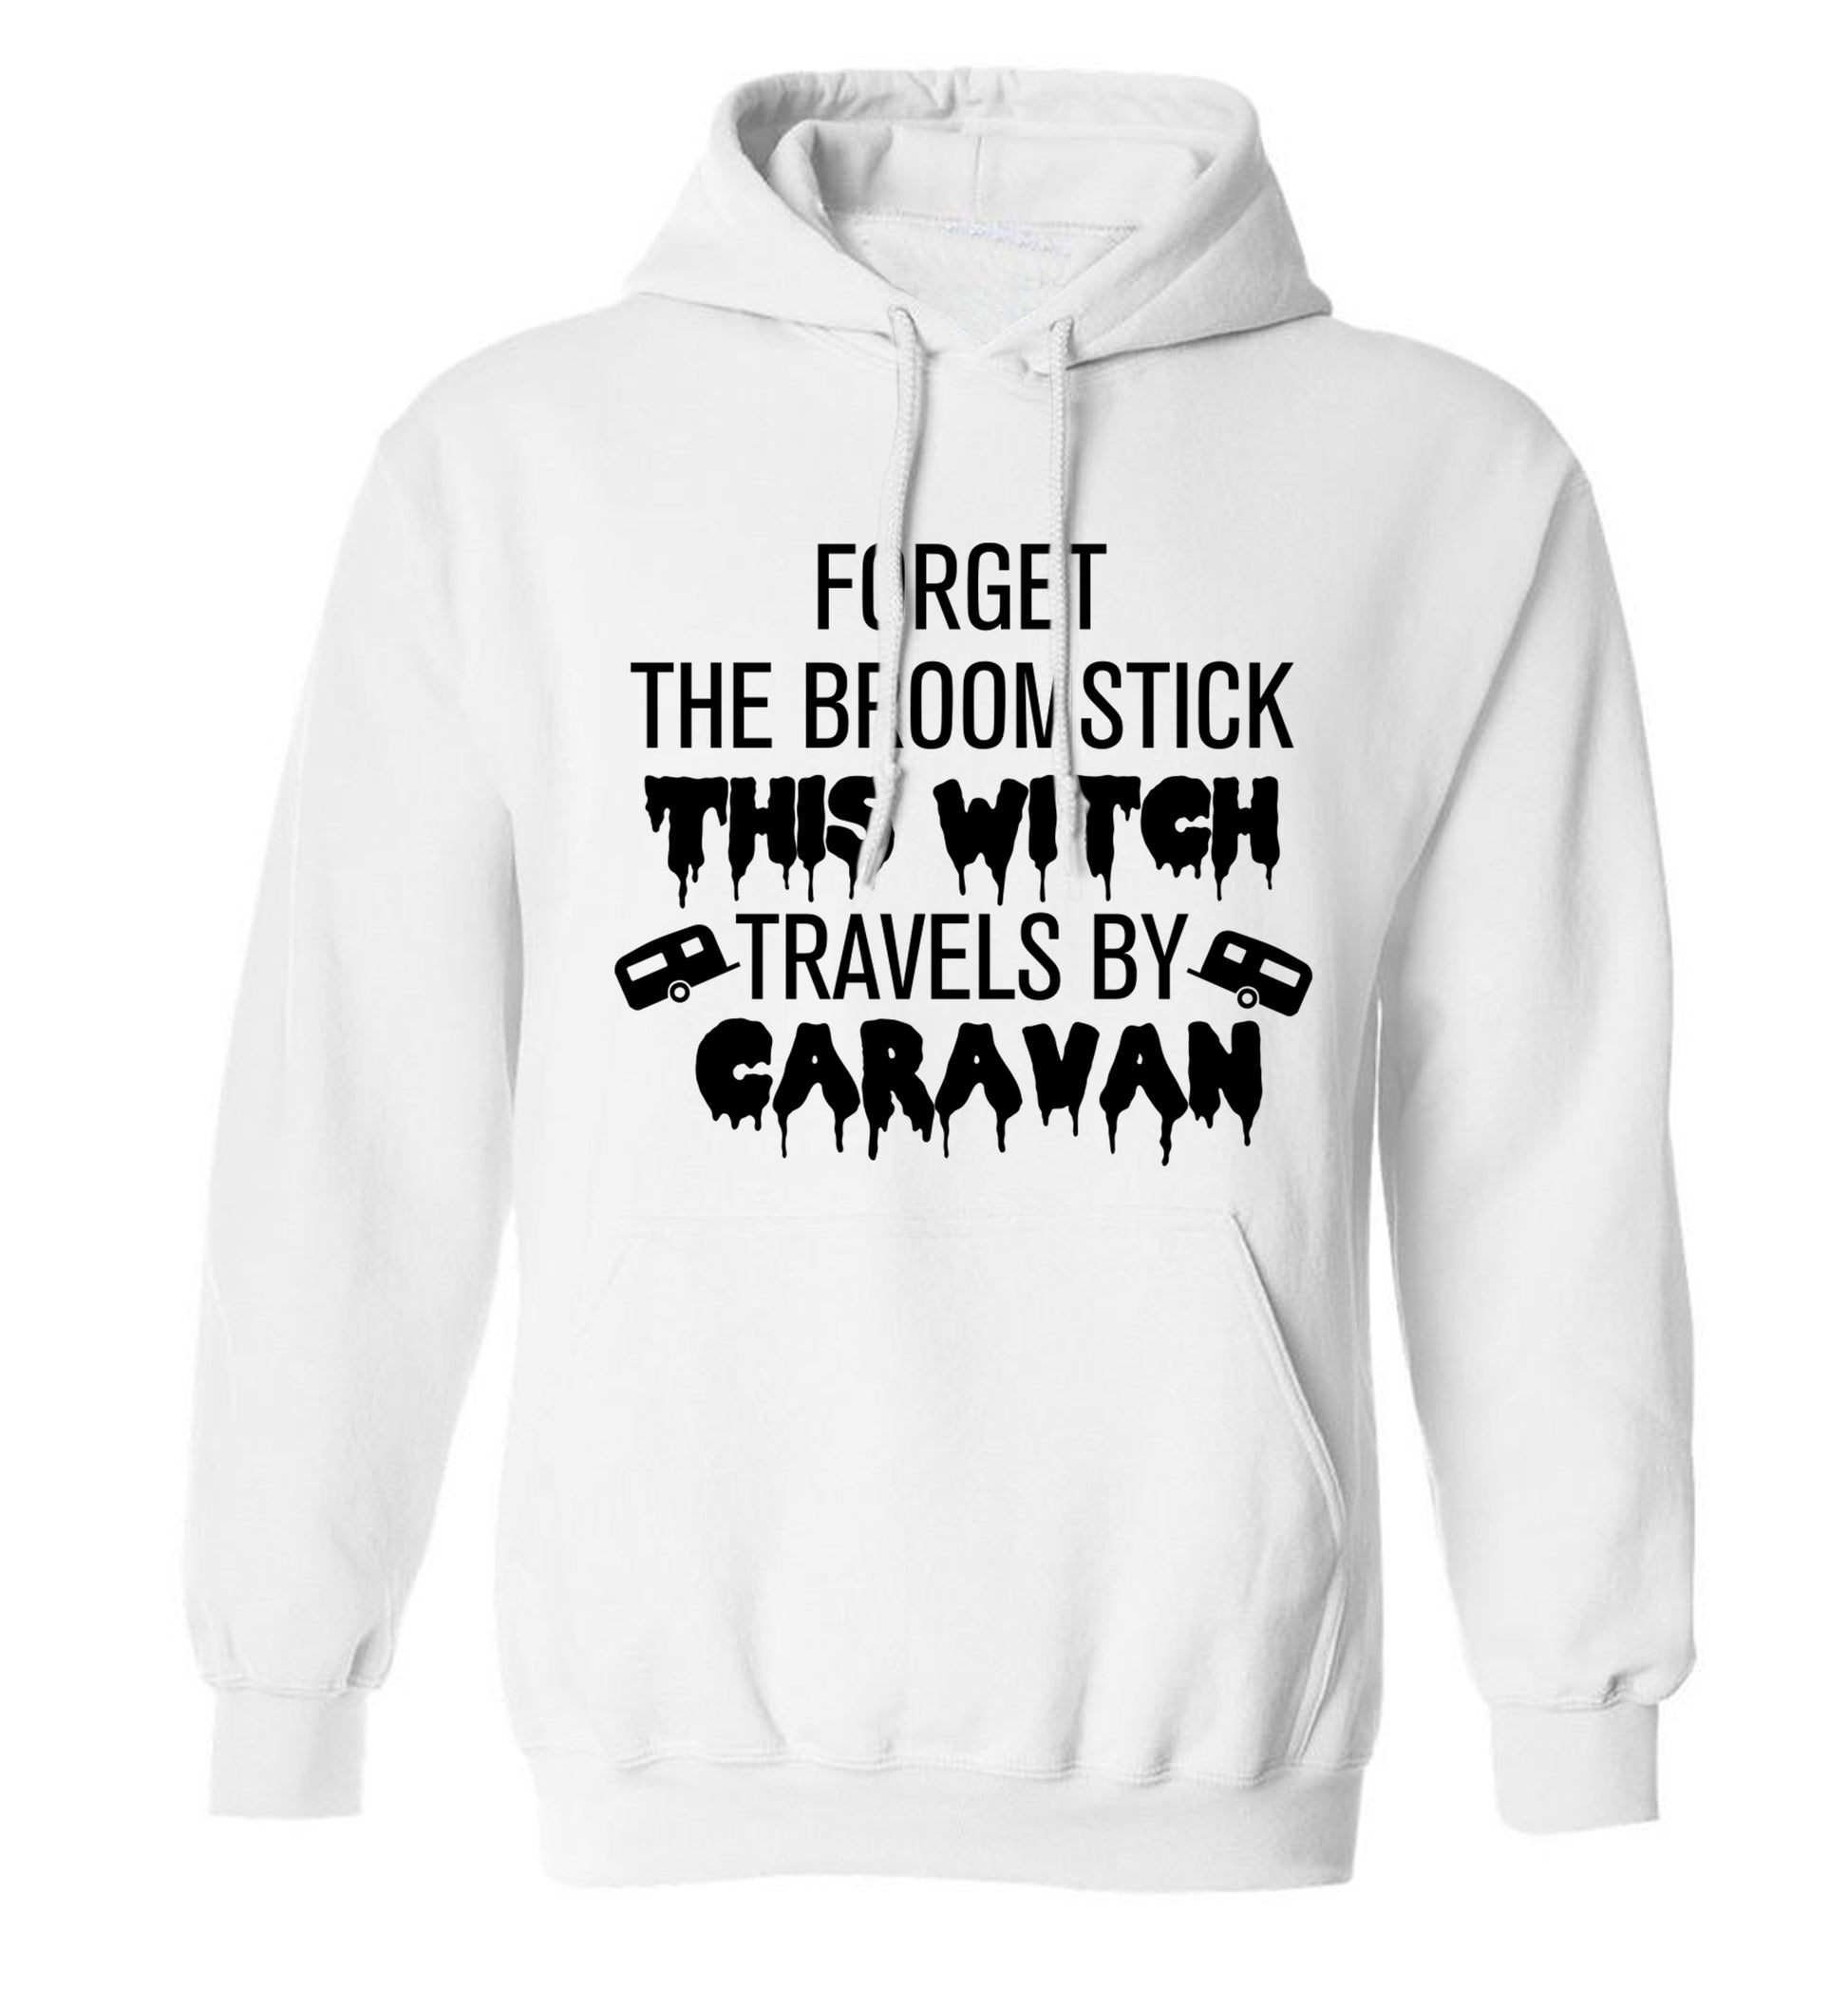 Forget the broomstick this witch travels by caravan adults unisexwhite hoodie 2XL